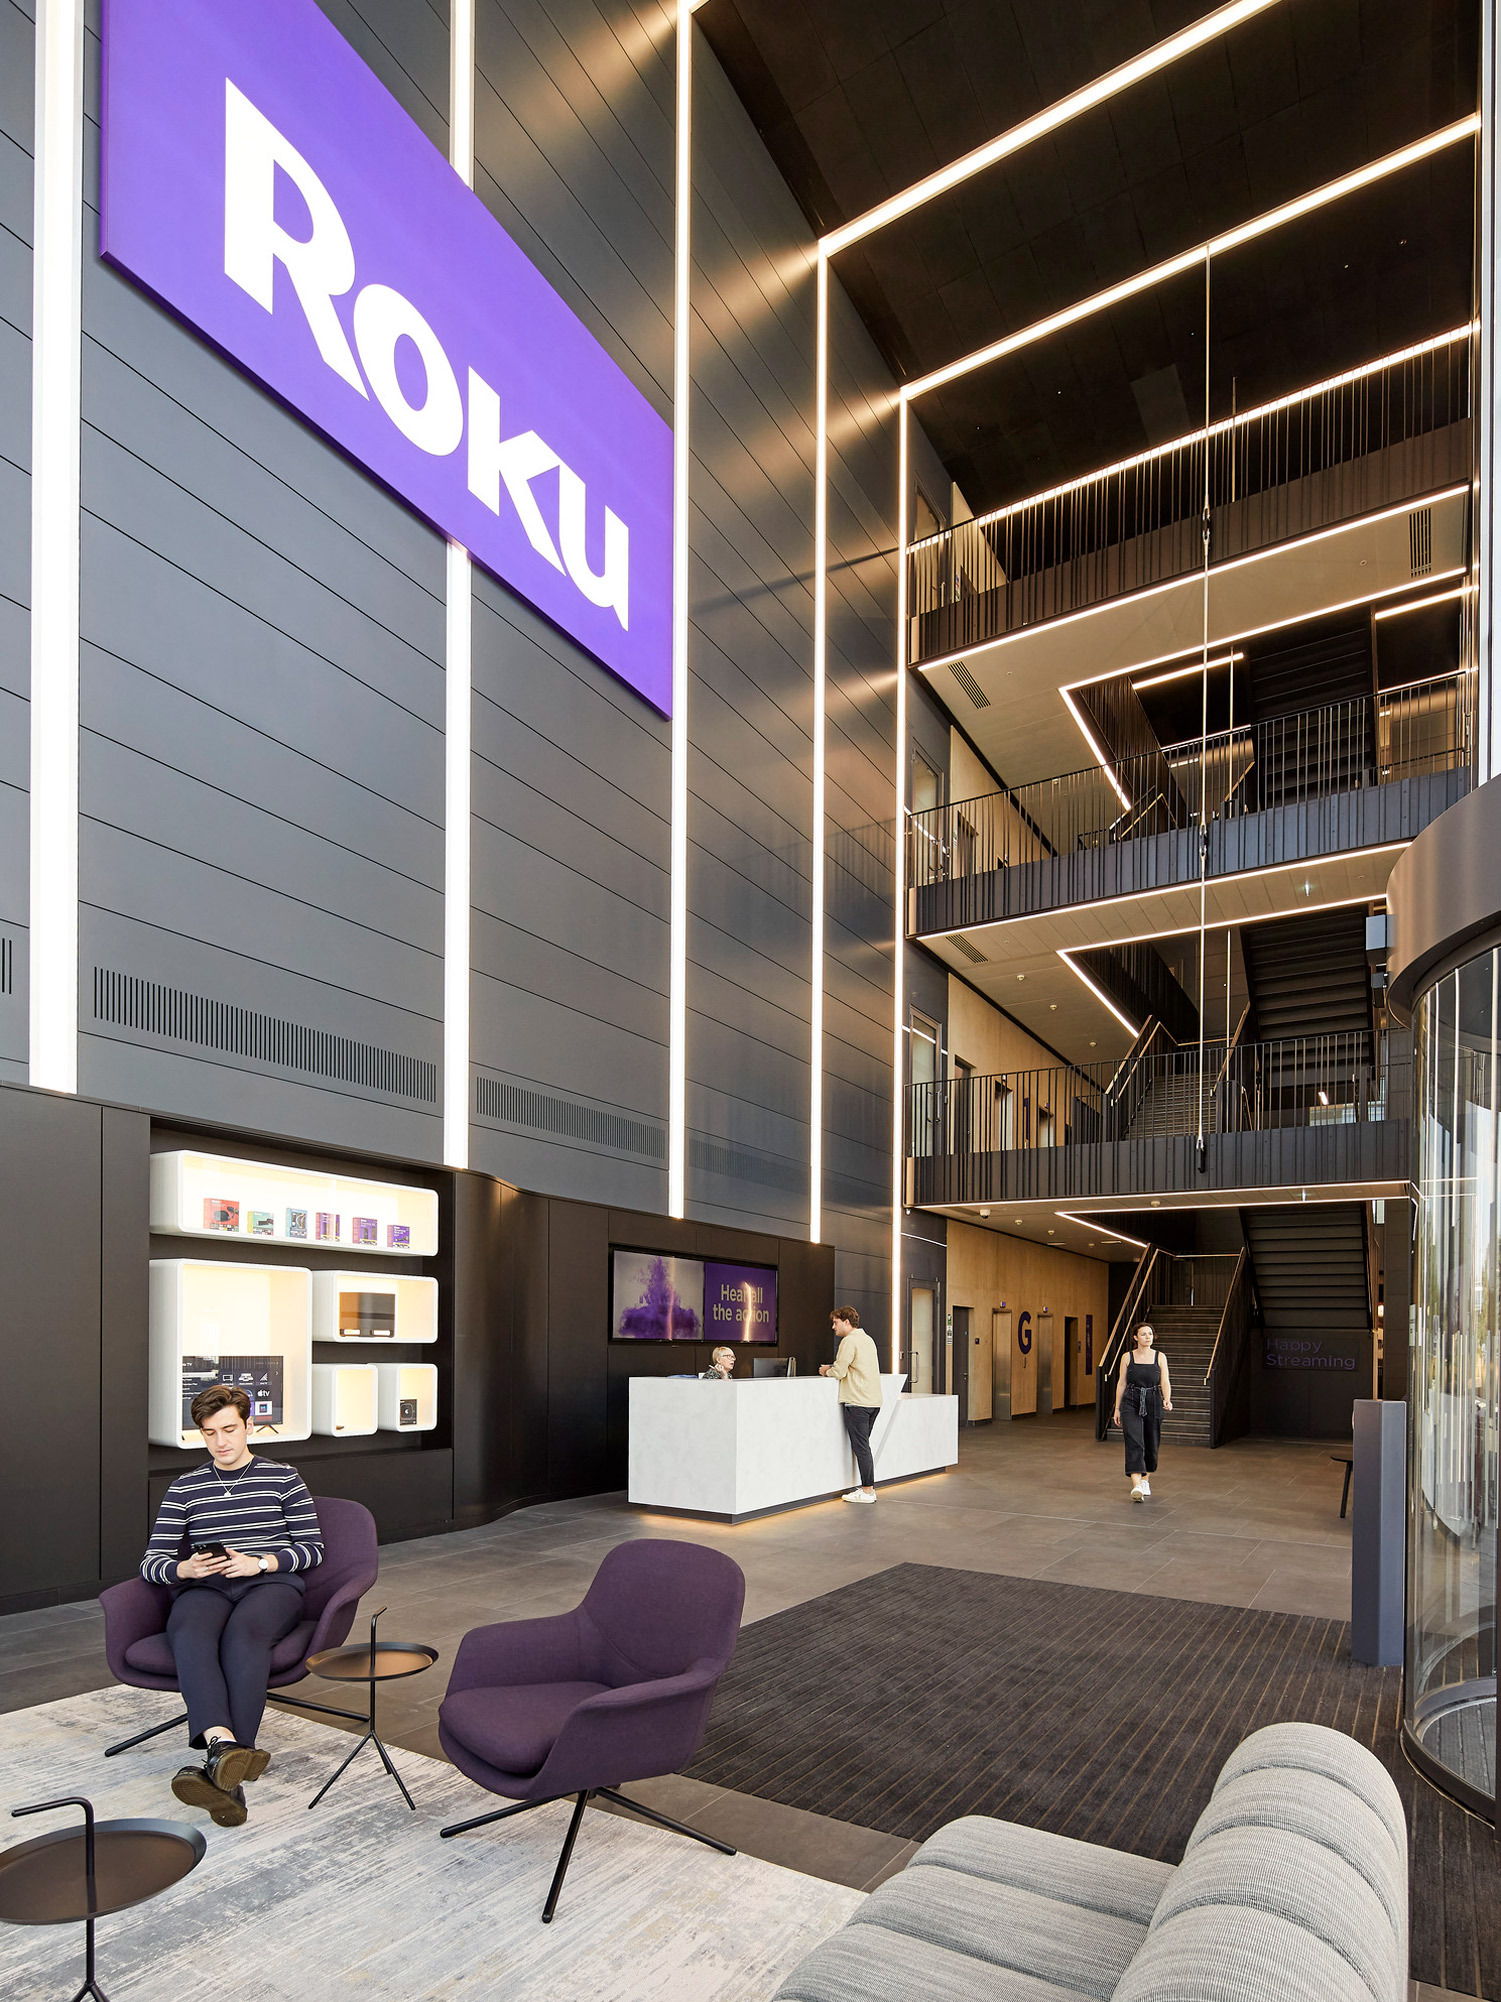 A modern corporate lobby featuring a tall ceiling with geometric black lines and recessed lighting. The Roku branding dominates the upper wall. Below, visitors navigate the open staircase while others sit on stylish purple chairs, surrounded by the warm textures of wood and gray carpeting.